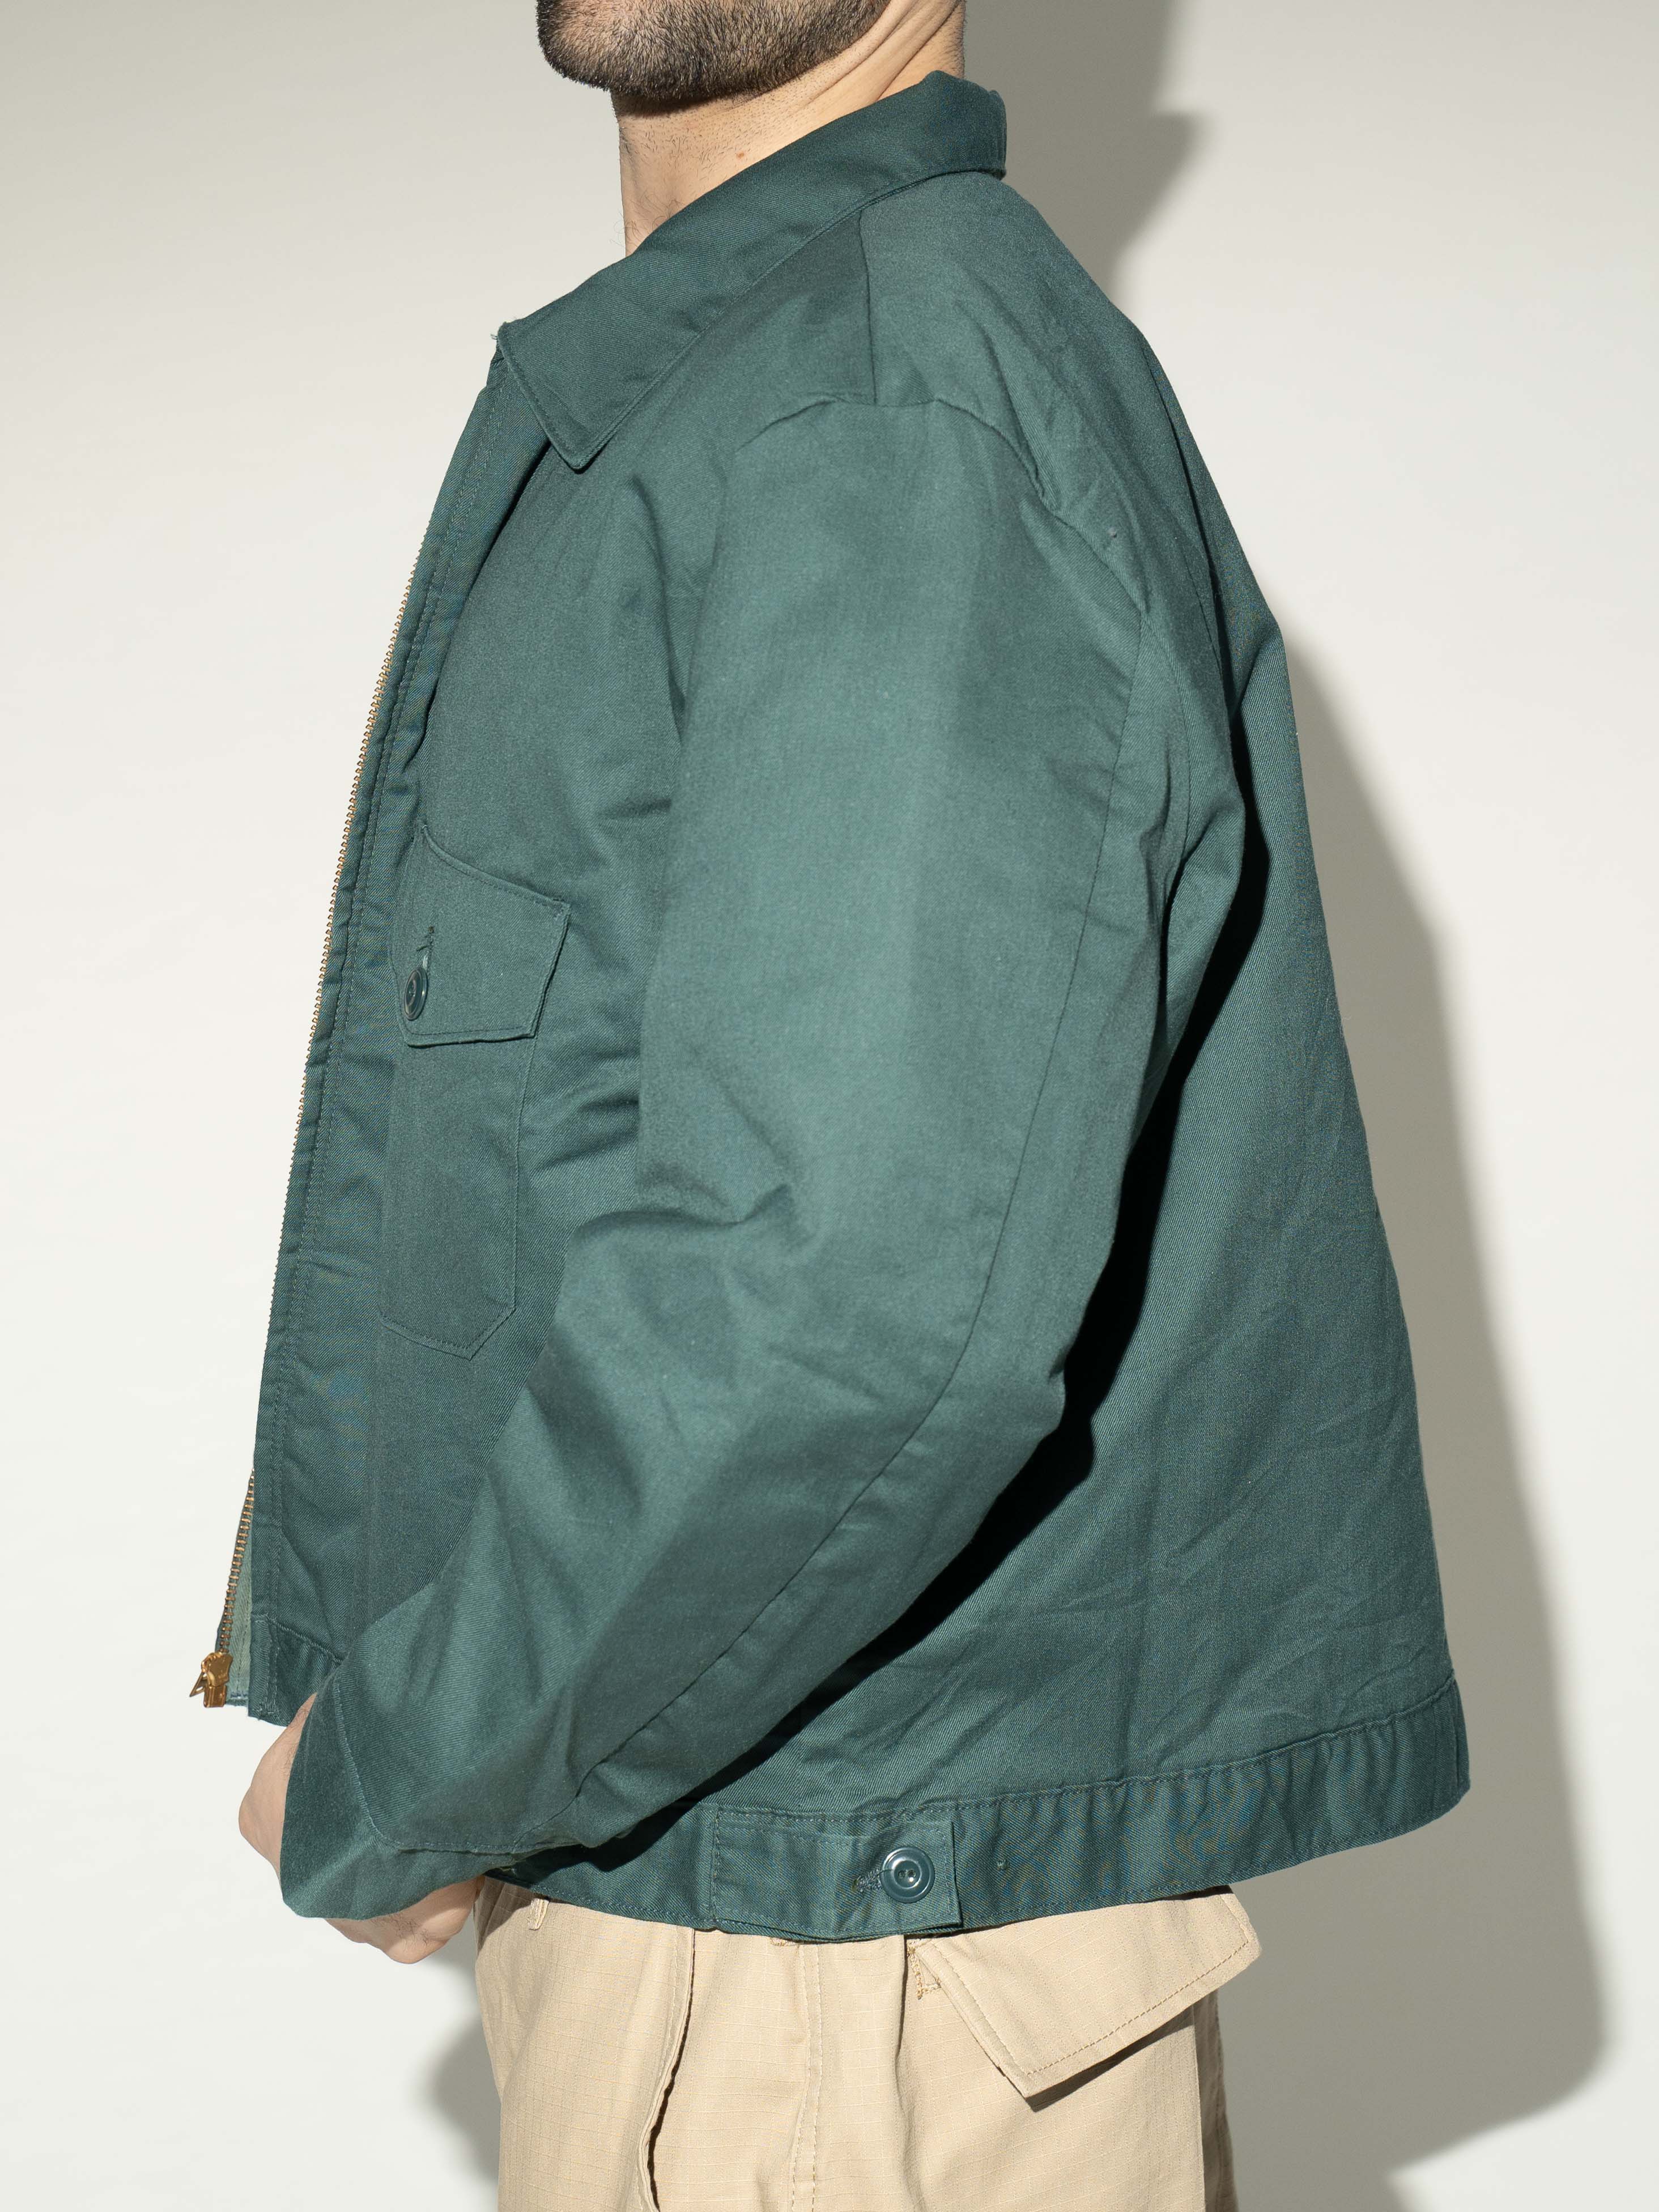 GREEN JACKET FROM THE 80S